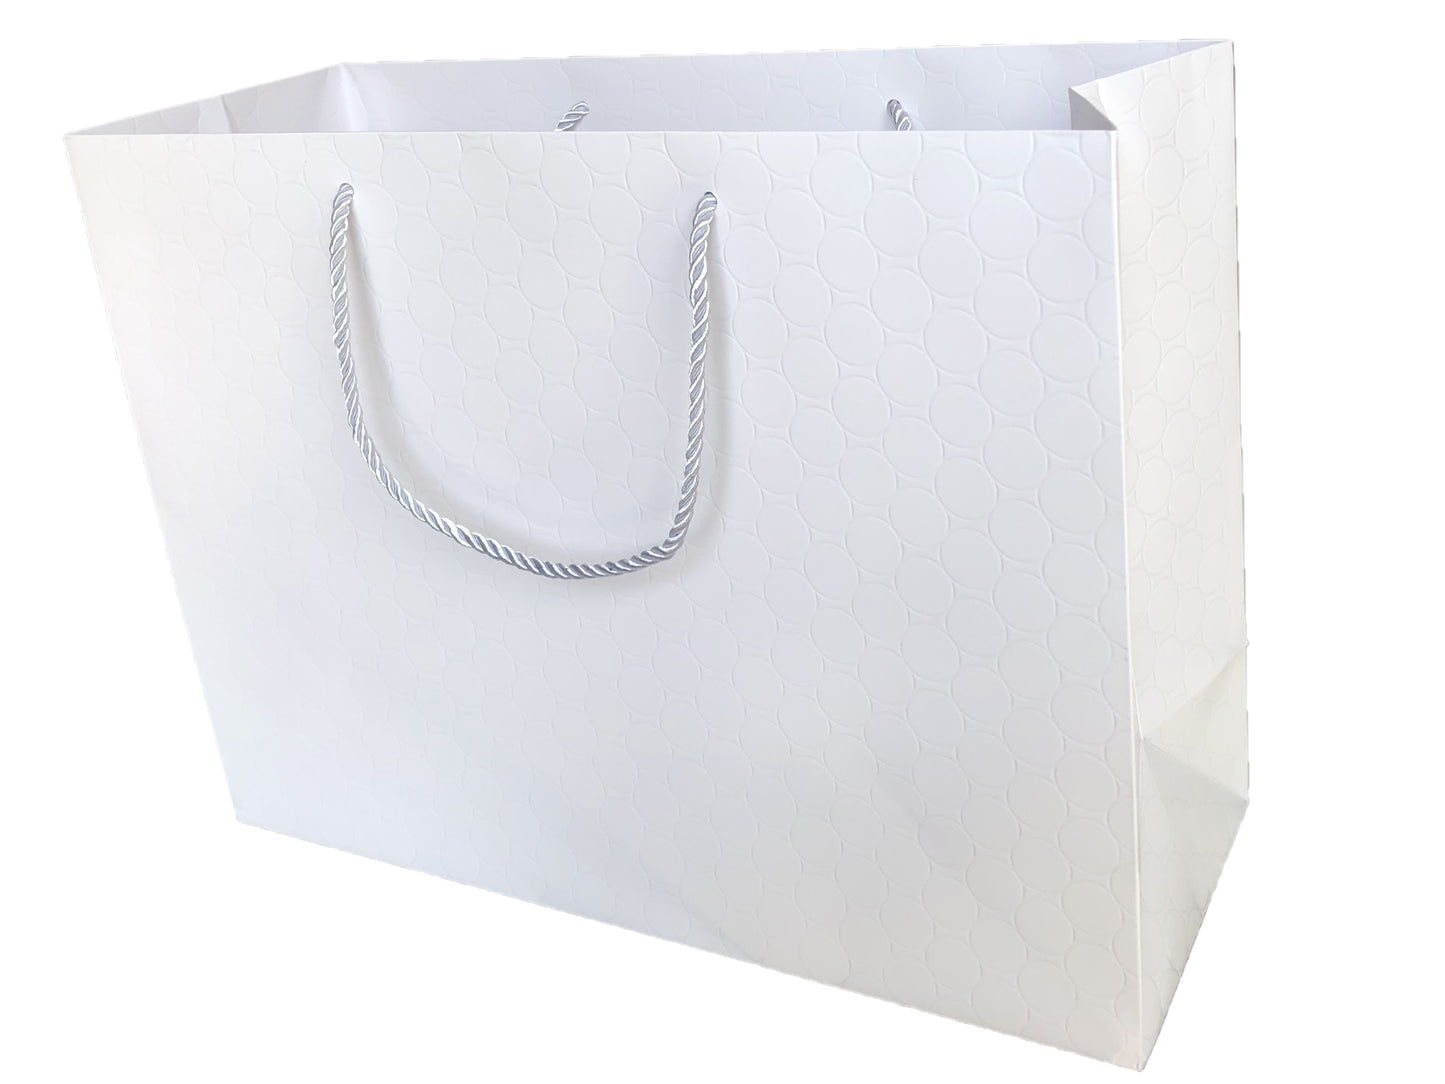 Extra Large White Paper Gift Bags Bulk with Handles 16x12x6 (100 Bags) Big Shopping Matte Luxury Fancy Elegant Embossed for Presents Merchandise Clothing Wedding Birthday Bridal Baby Shower